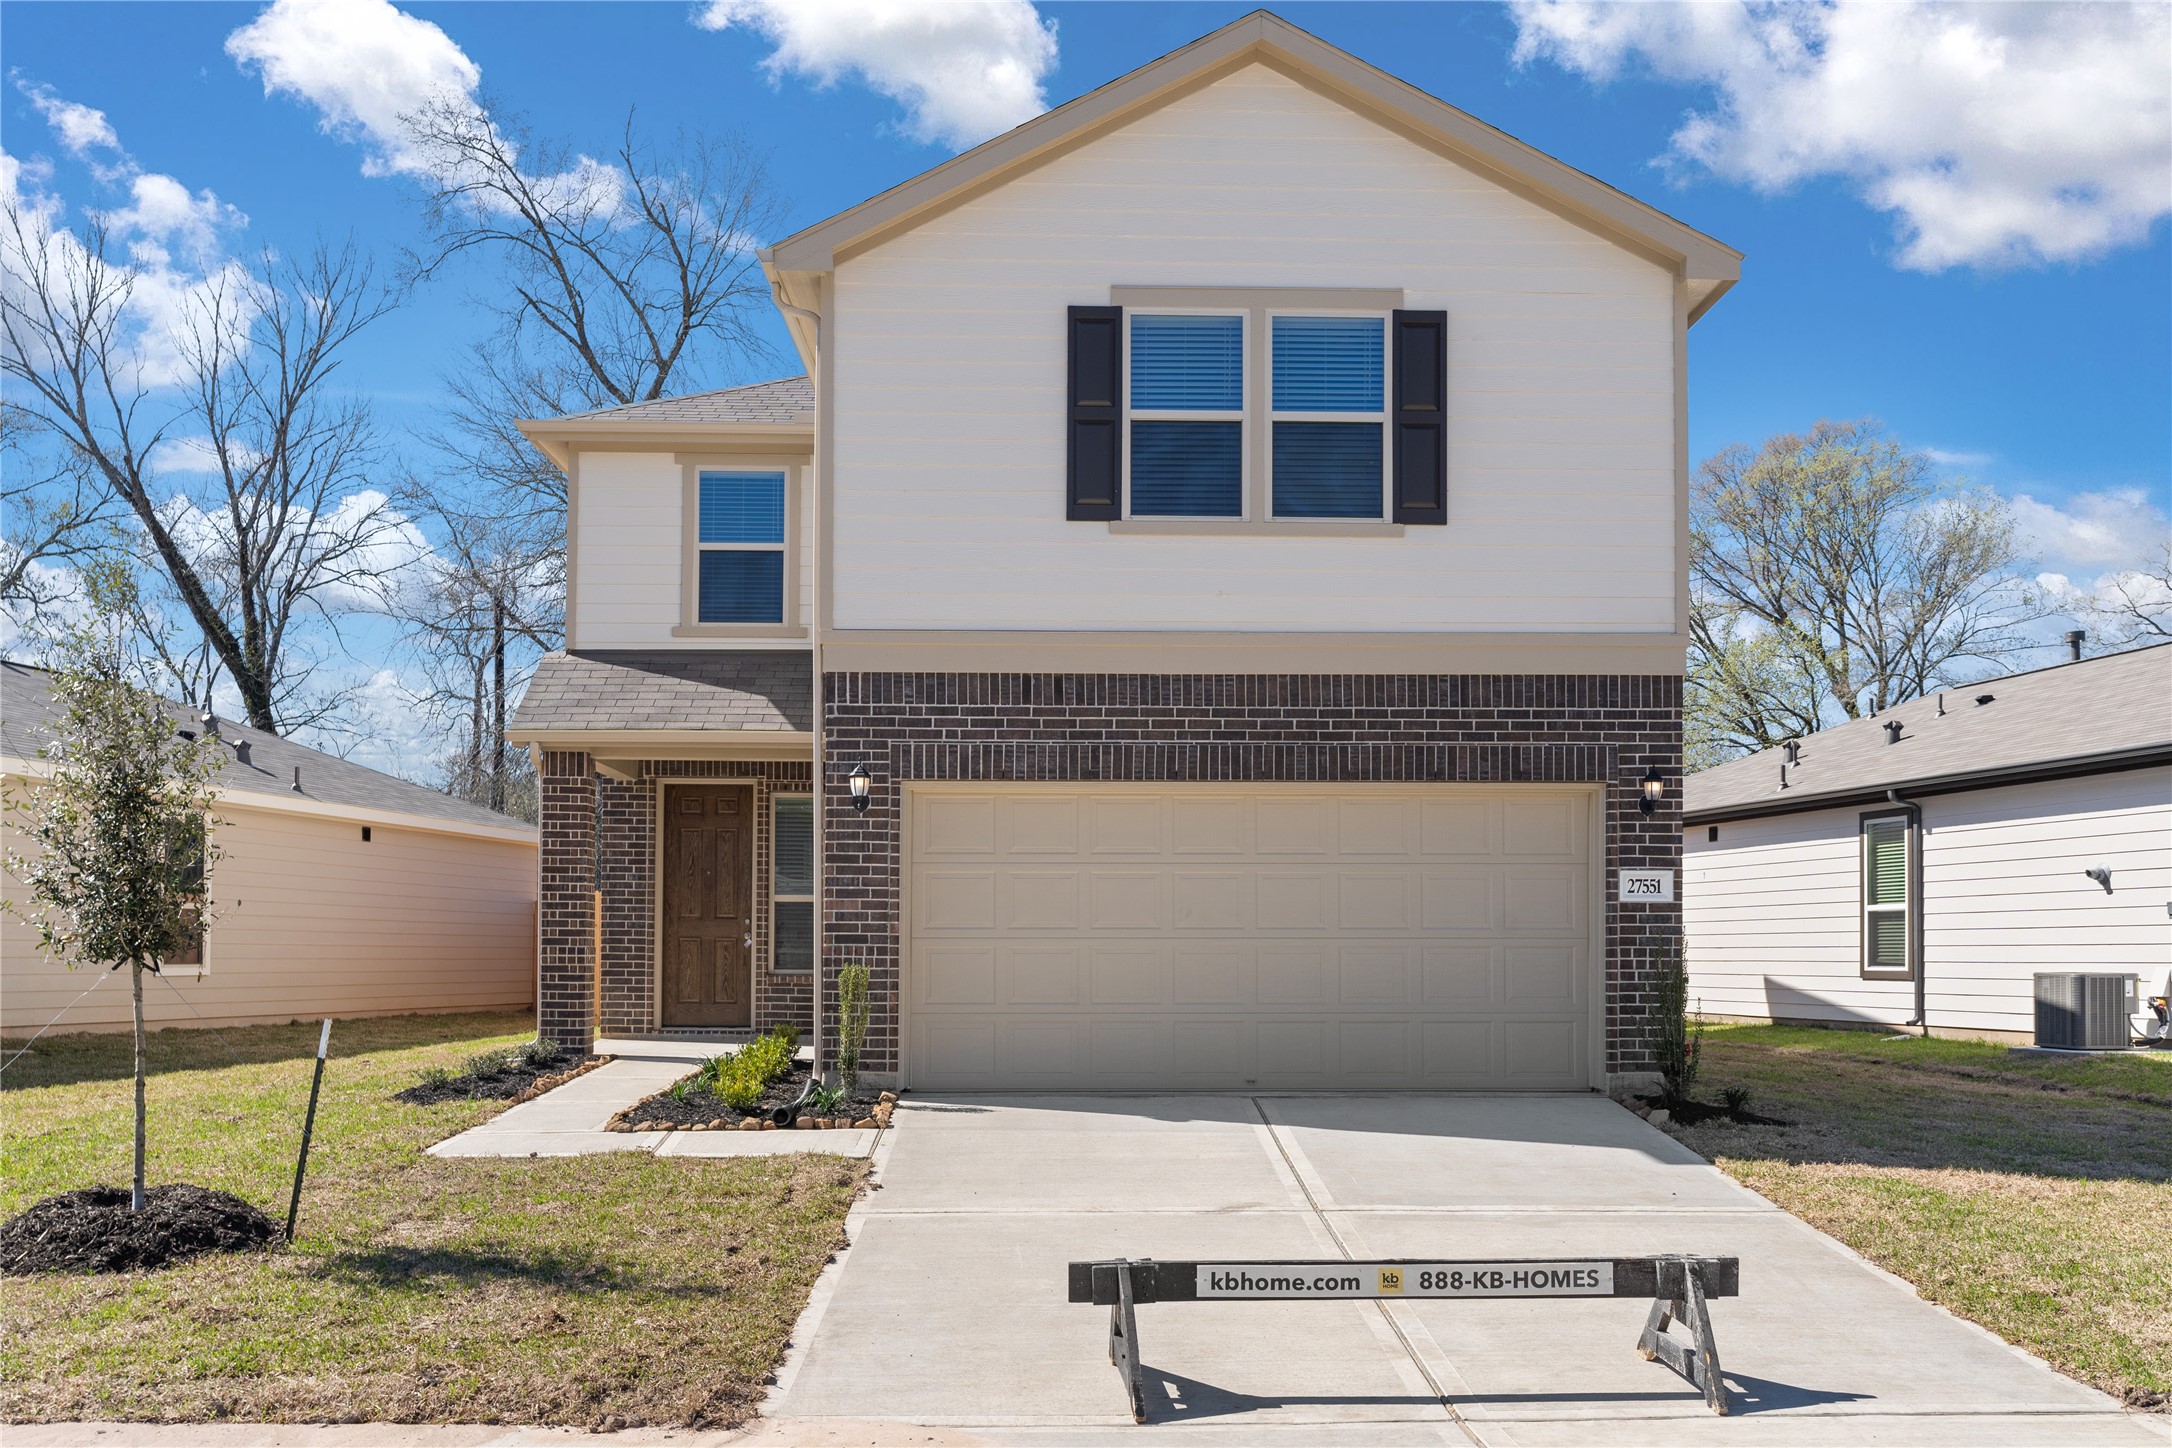  Welcome home to 27551 Bello Bend Lane located in Creekside Court and zoned to Magnolia ISD!